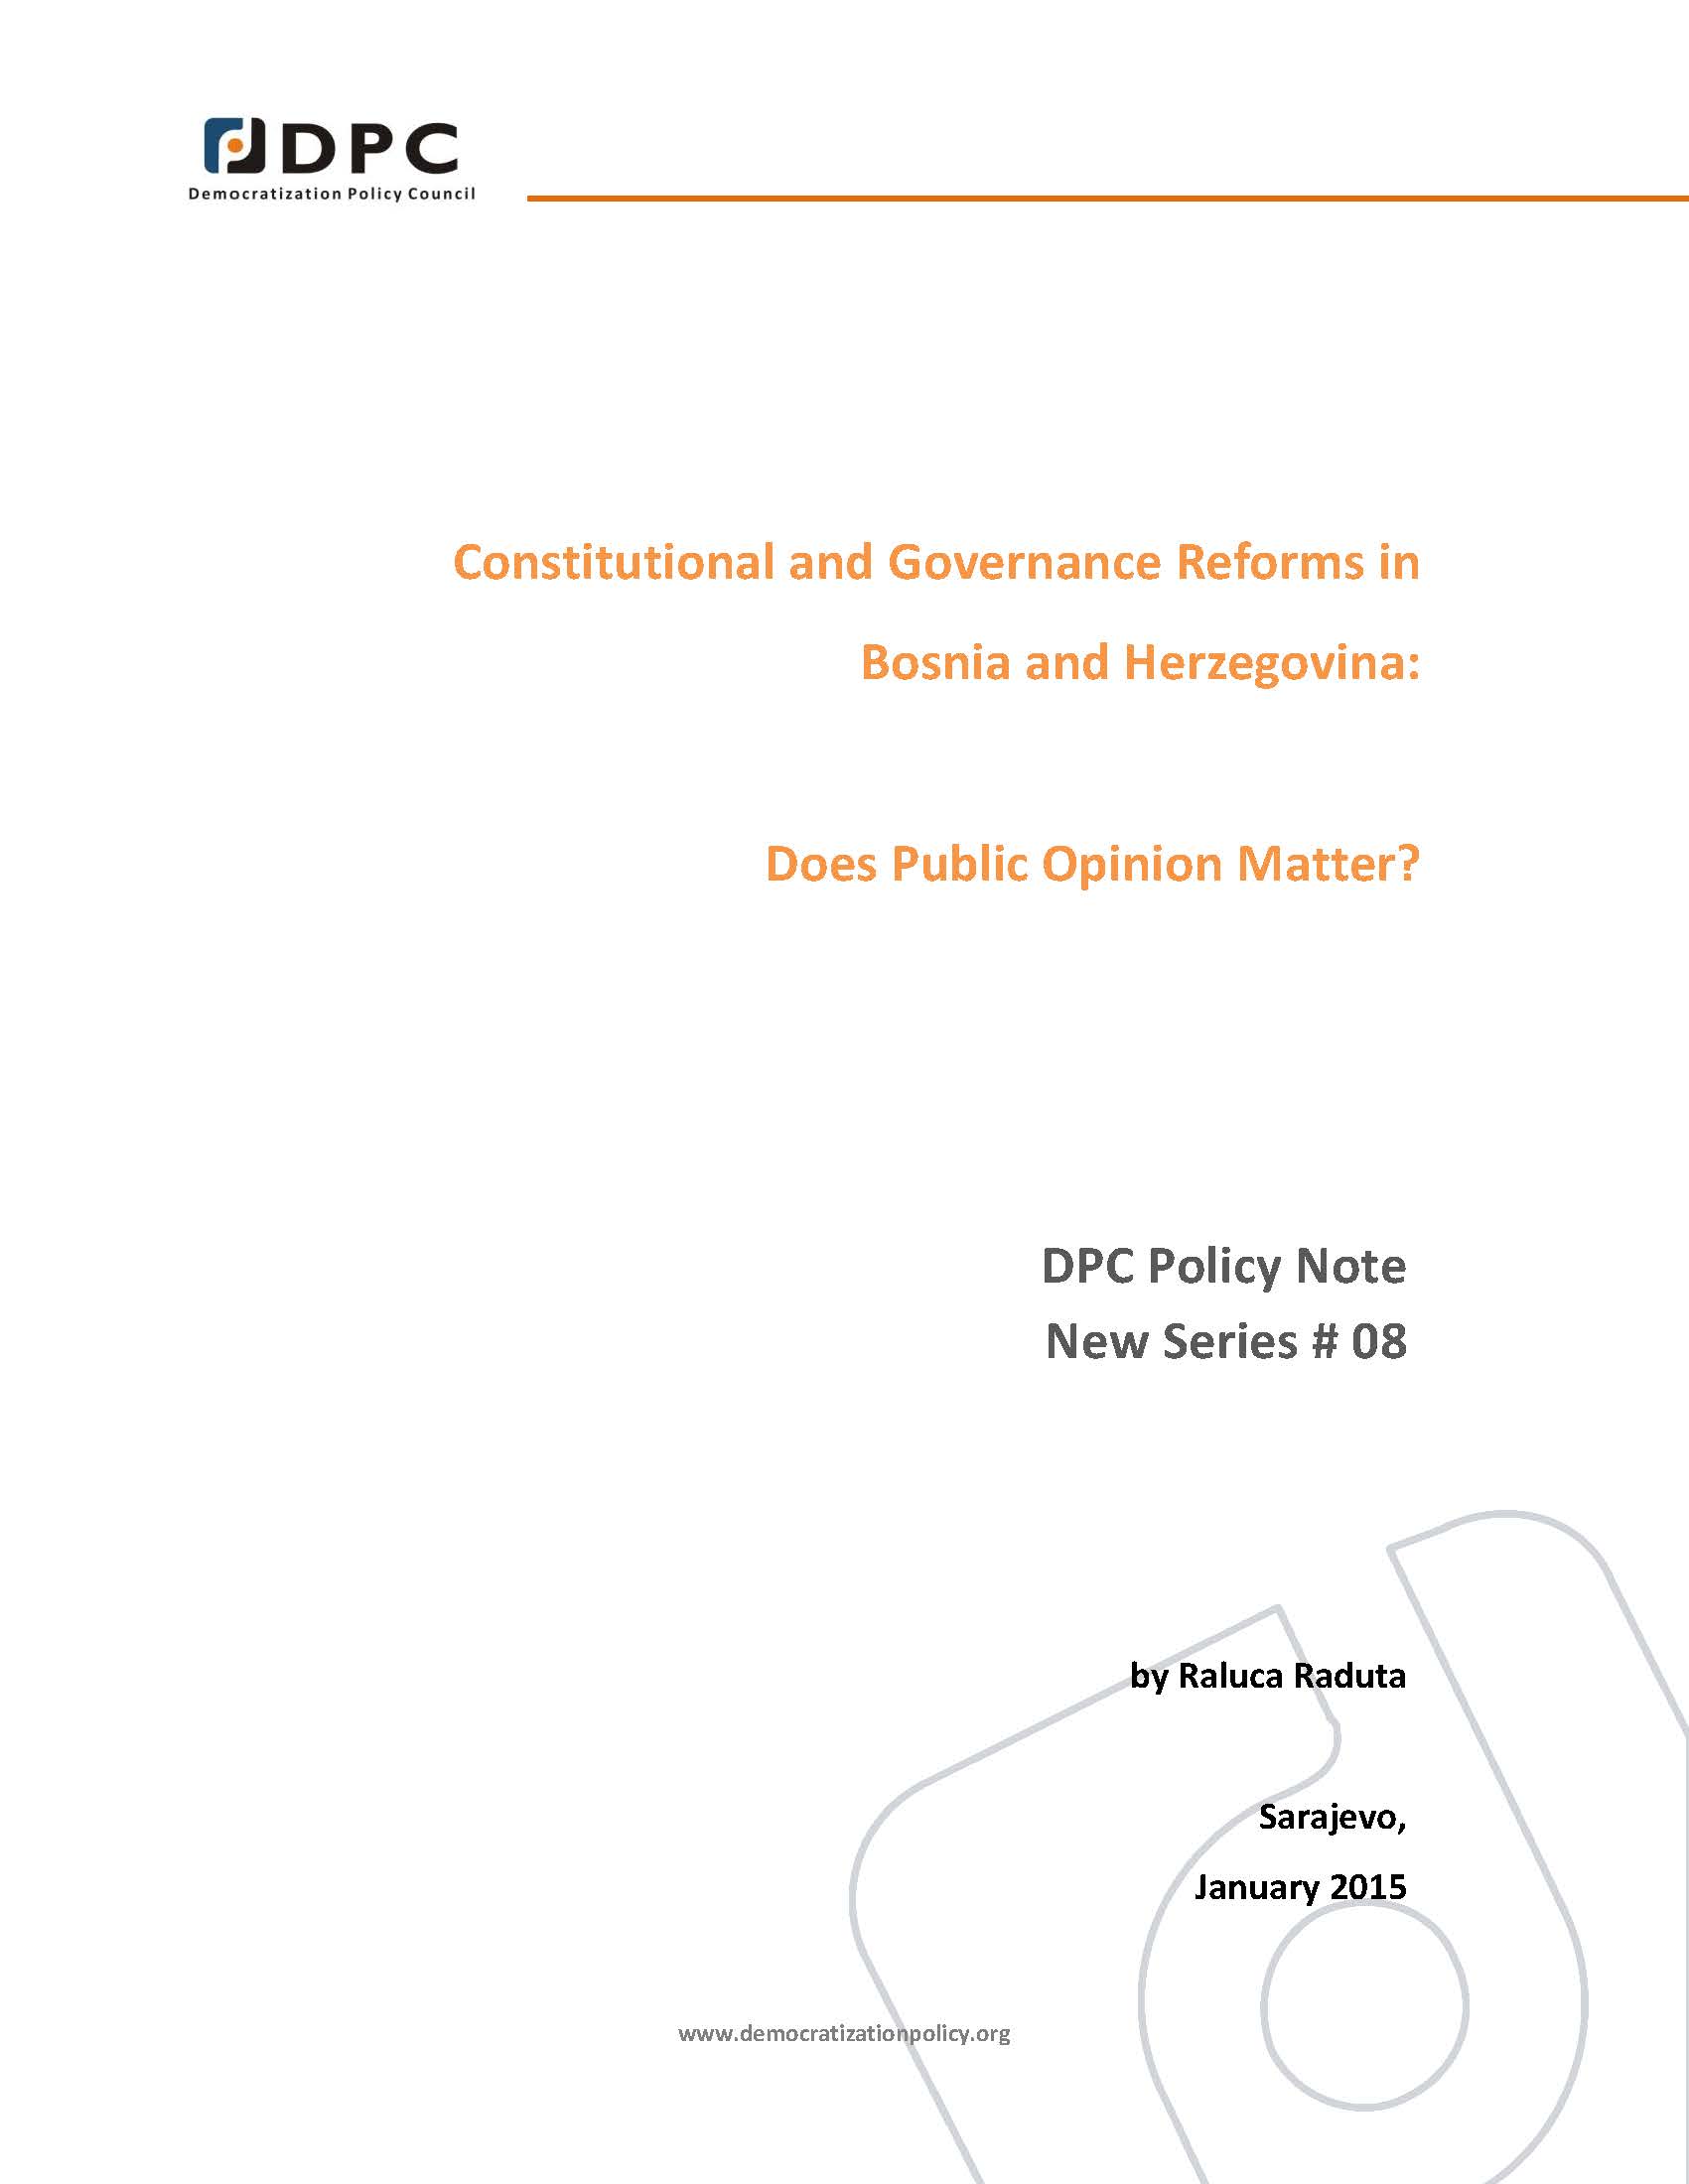 DPC POLICY NOTE 08: Constitutional and Governance Reforms in Bosnia and Herzegovina: Does Public Opinion Matter? Cover Image